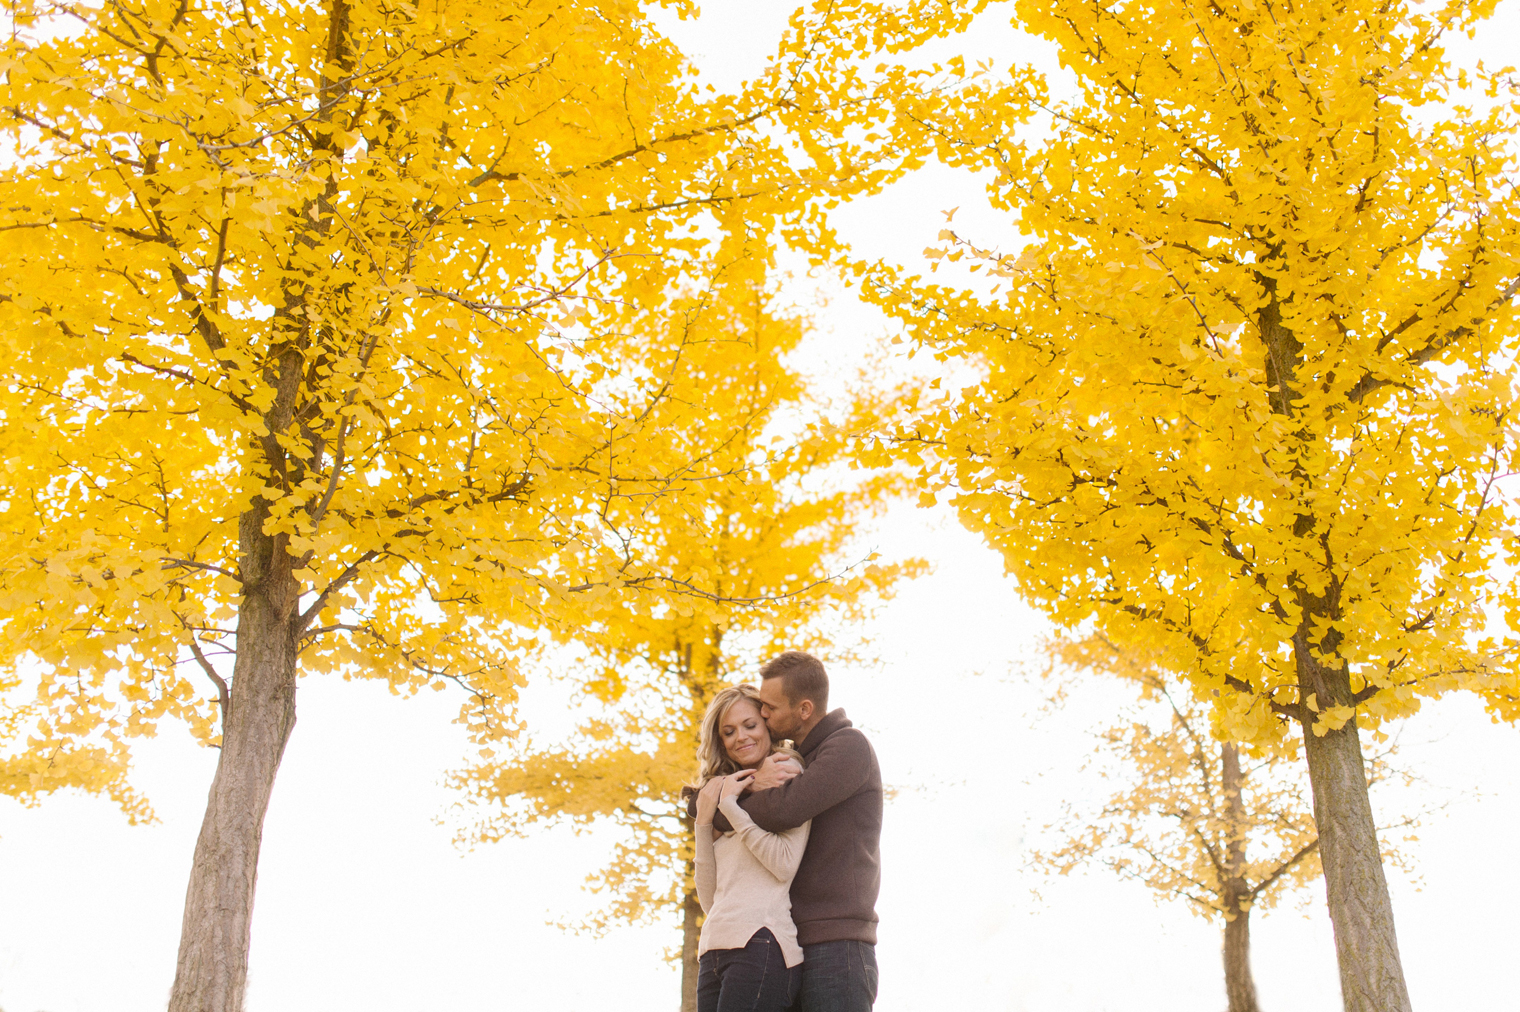 Stunning fall foliage at a couples session at the Matthei Botanical Gardens in Ann Arbor by wedding photographer Heather Jowett.